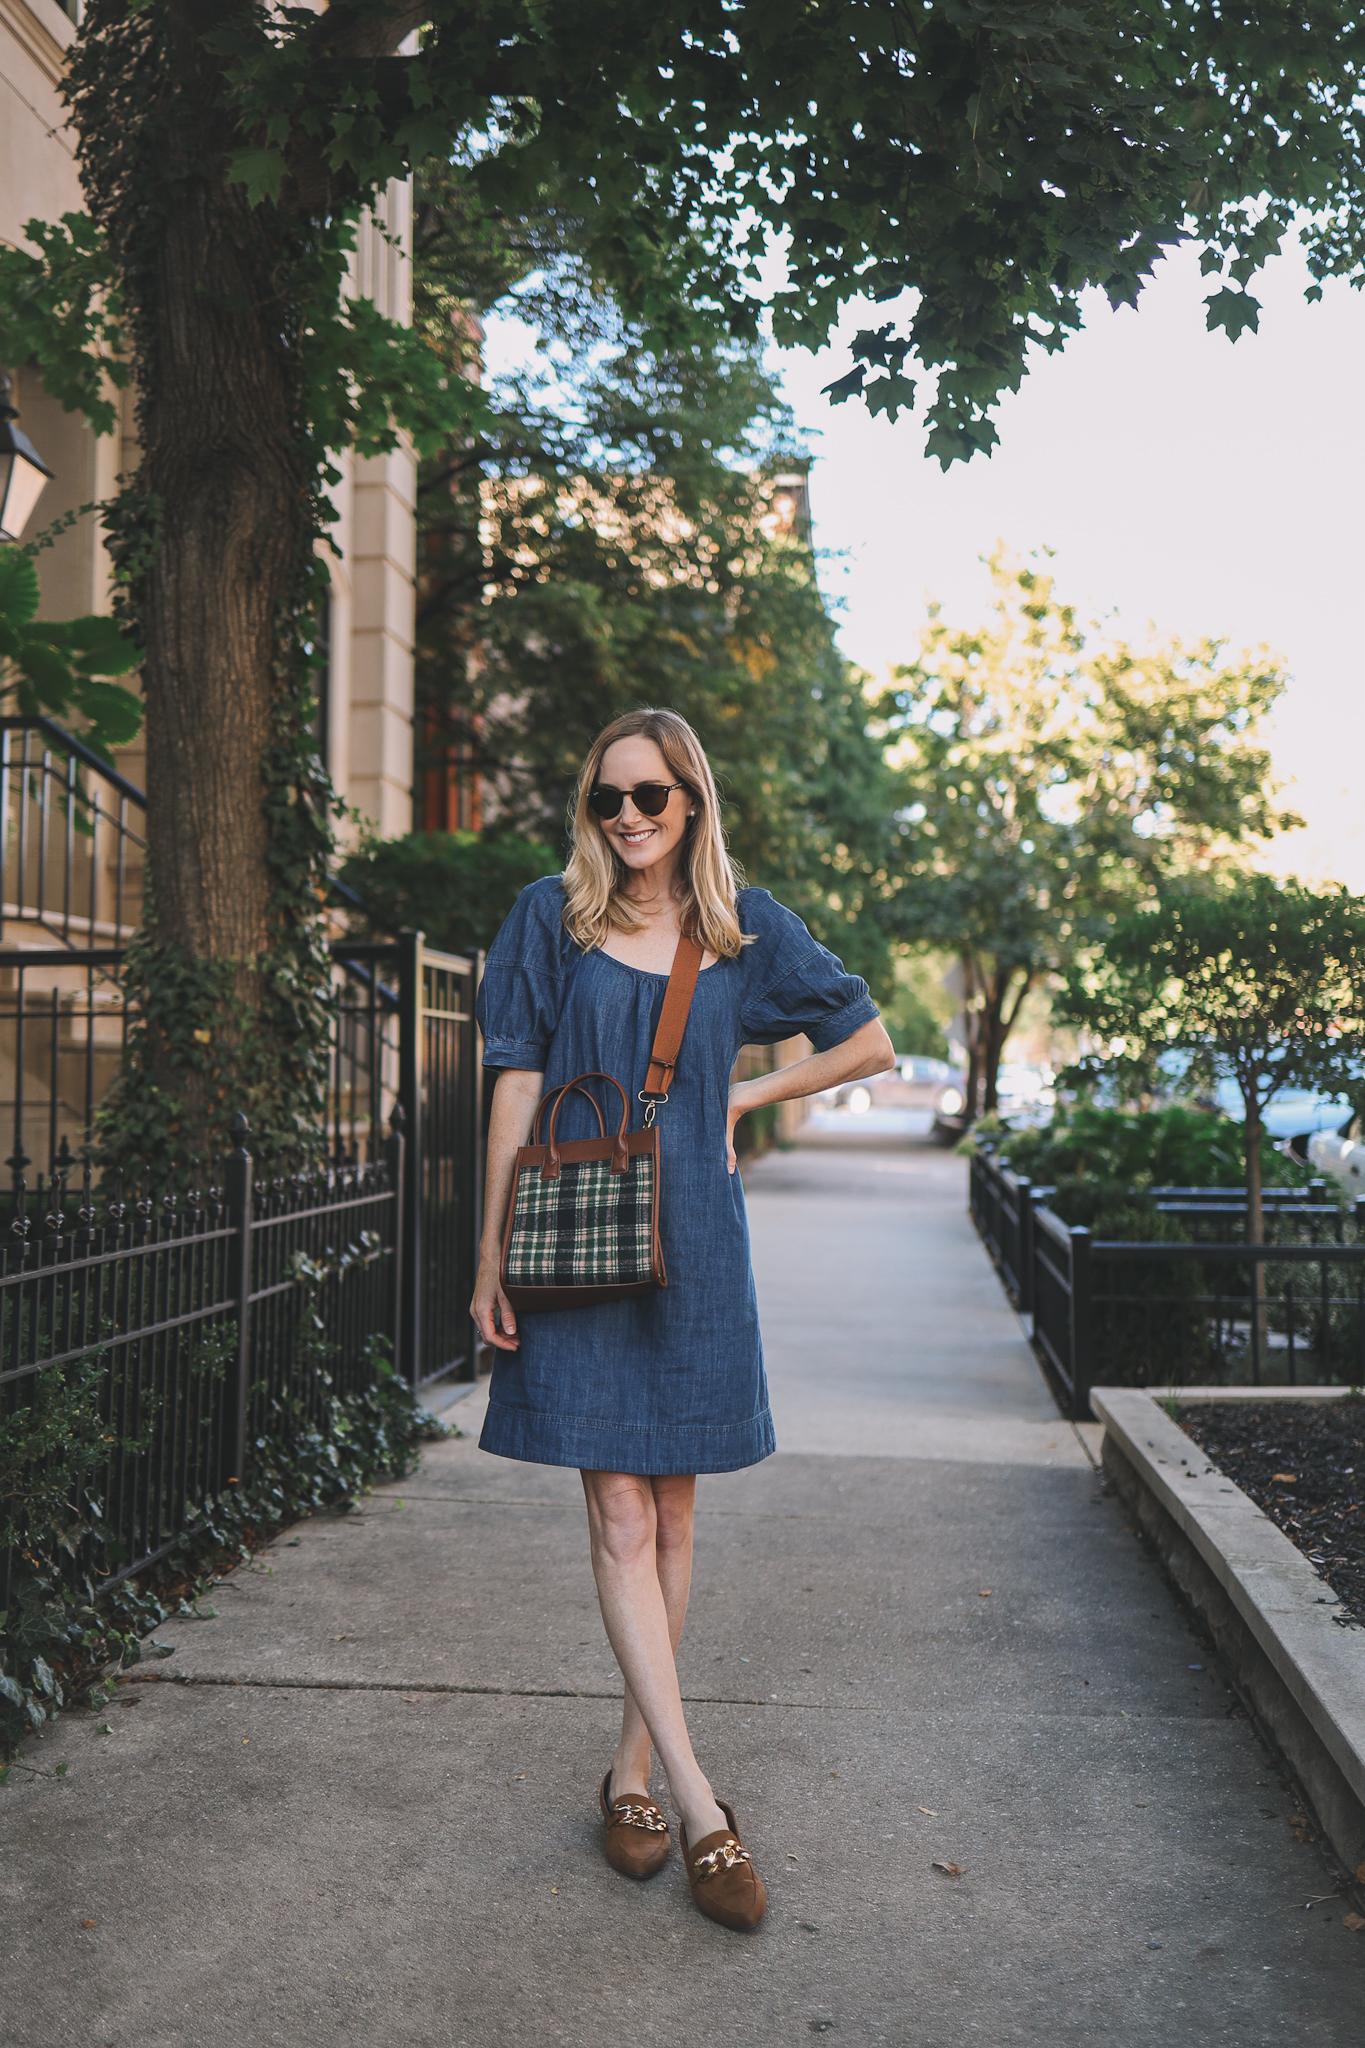 Kelly in the City - A Preppy Chicago Life, Style and Fashion Blog